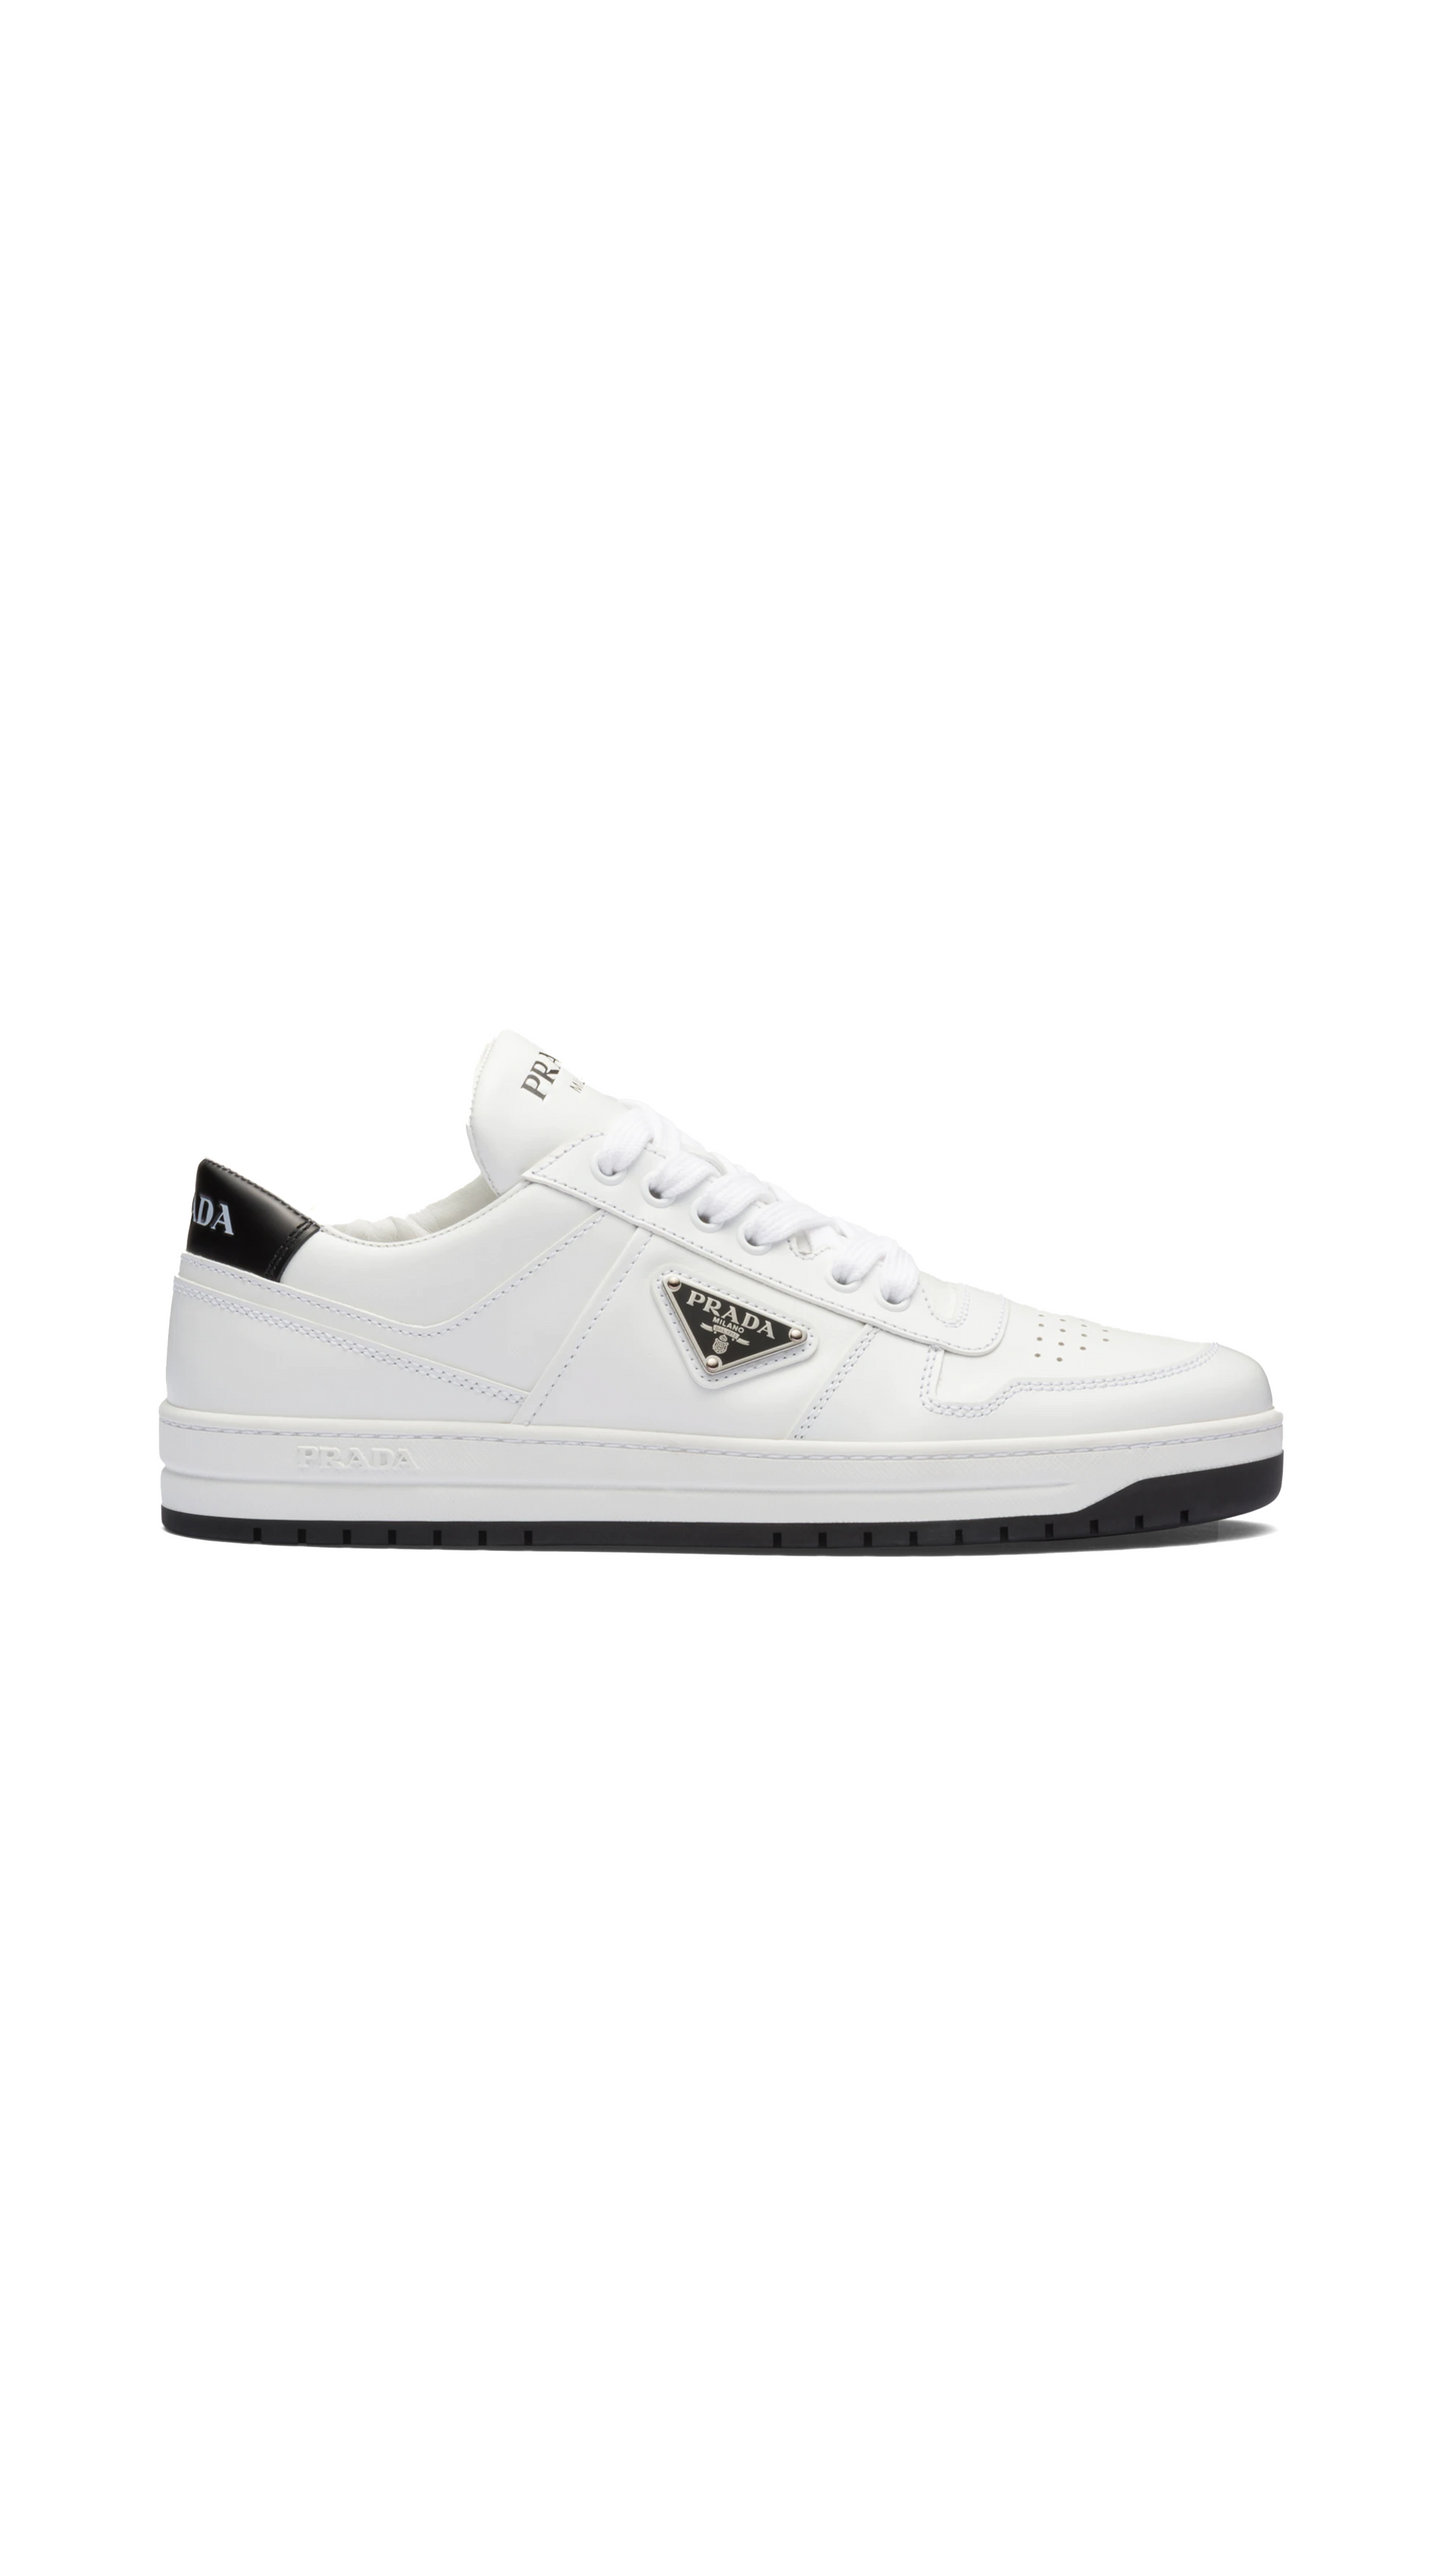 Downtown Perforated Leather Sneakers - White